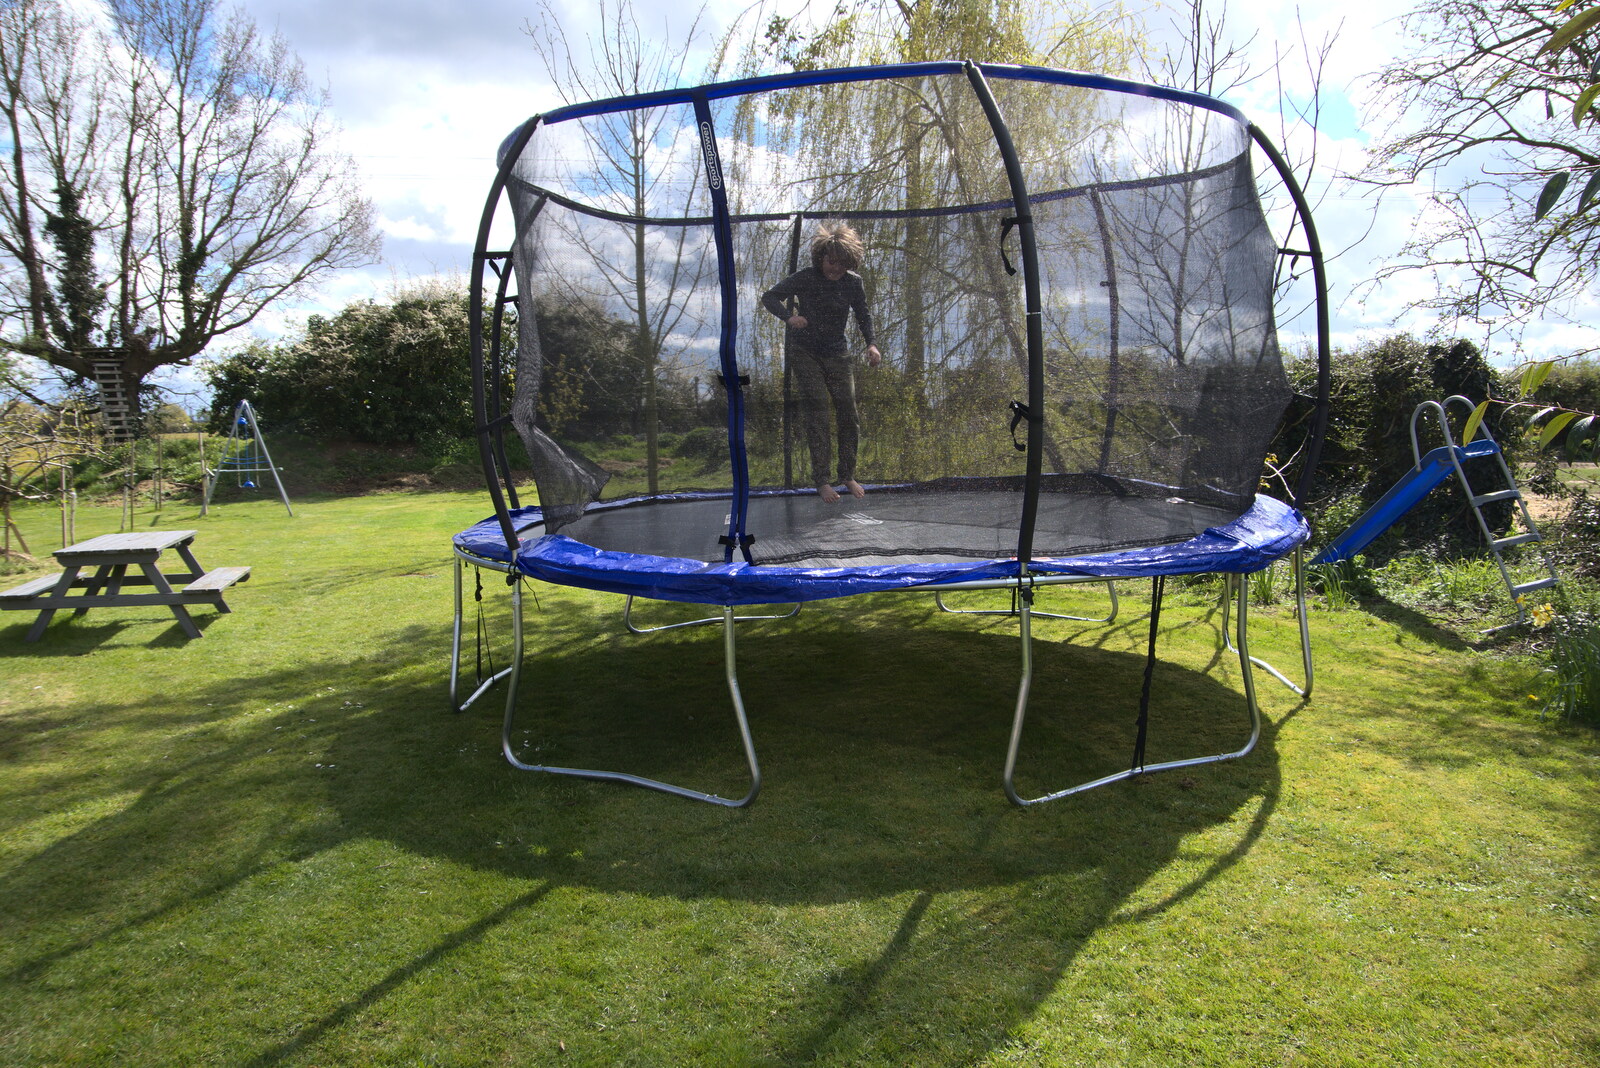 Fred has a bounce on the trampoline from Roadworks and Harry's Trampoline, Brome, Suffolk - 6th April 2021